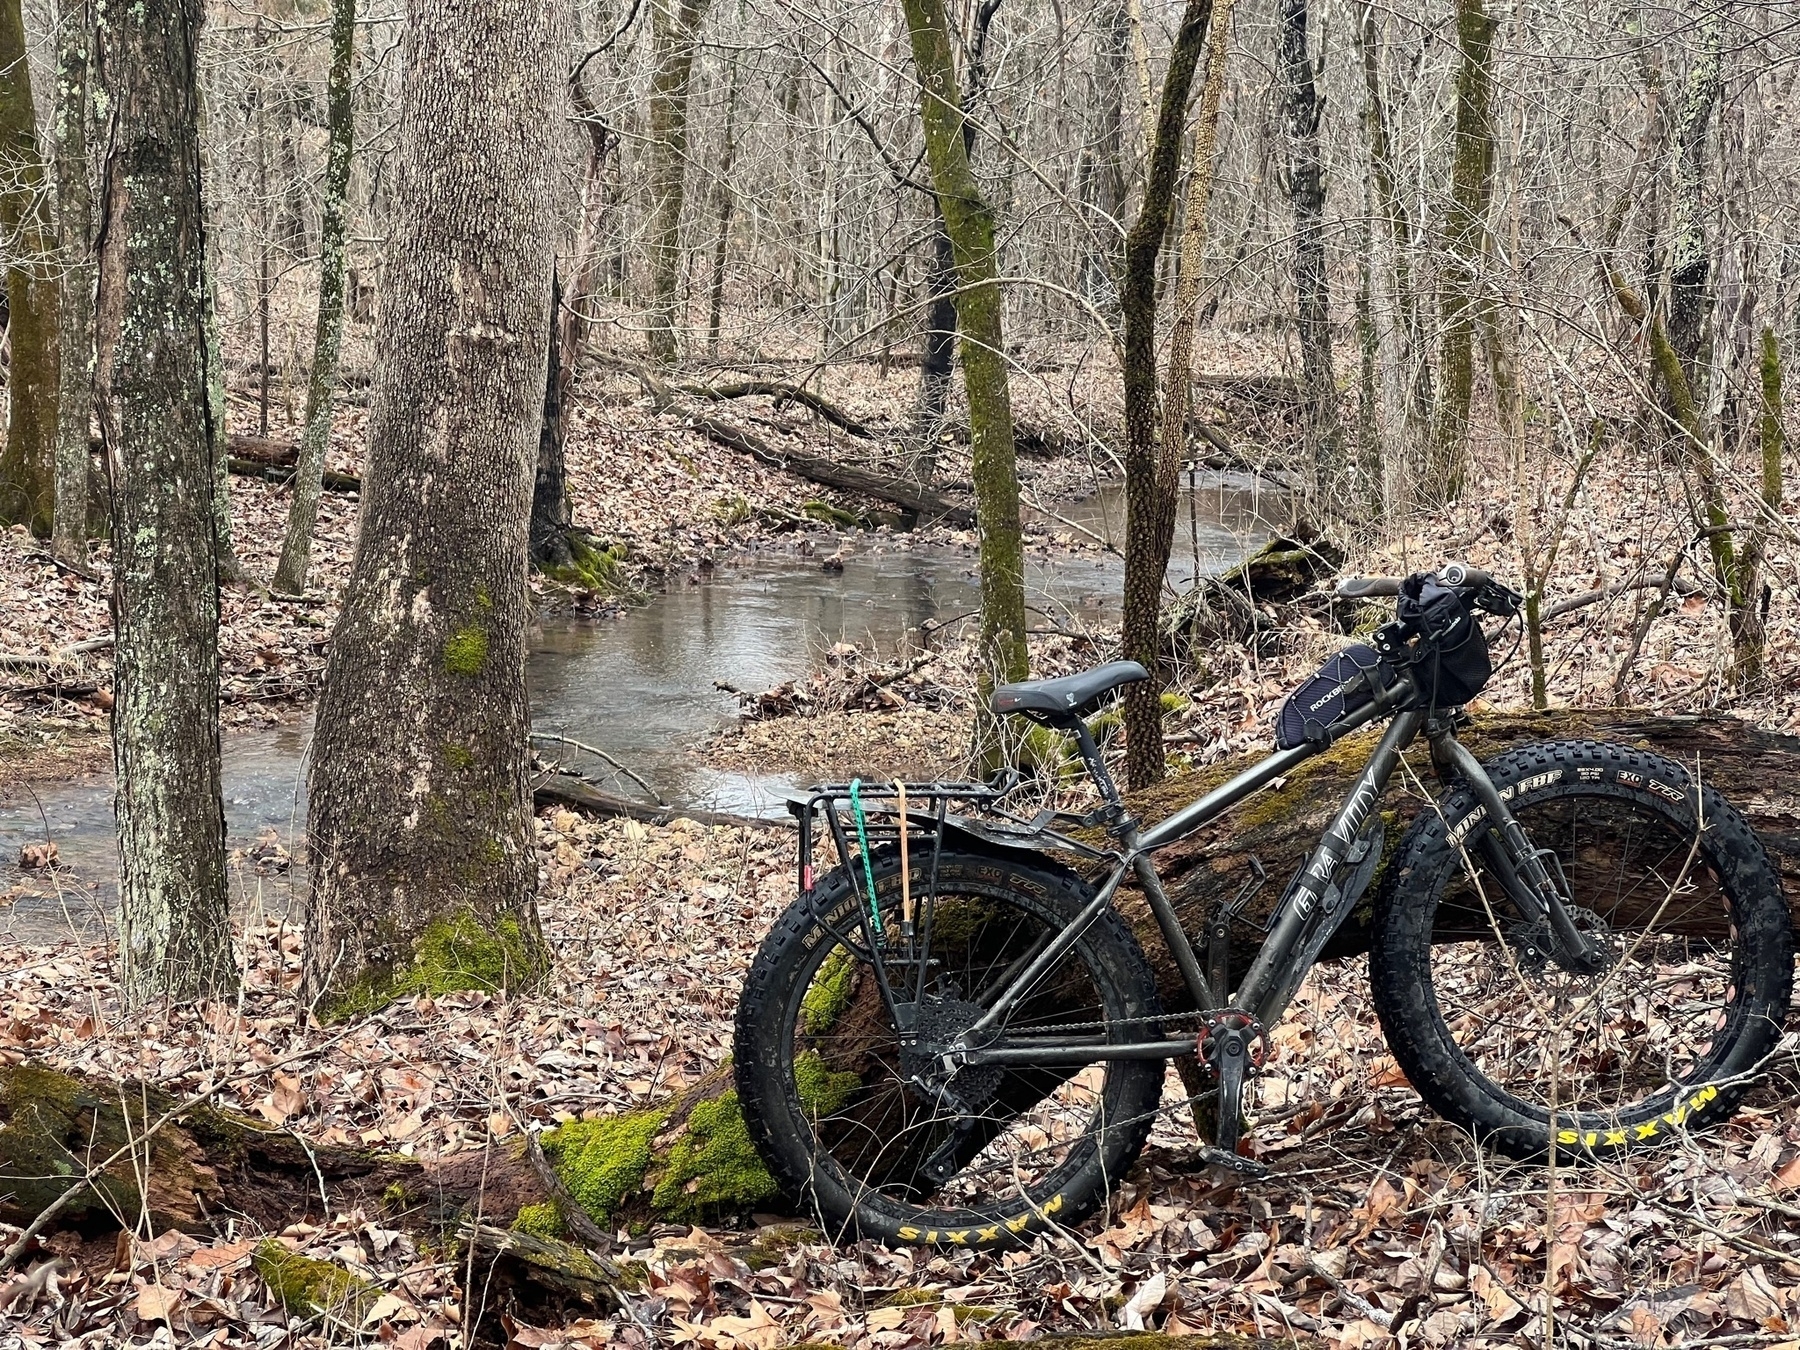 A fat tired bike leans against the moss covered remains of a fallen tree. In the background is a creek in a winter woodland.